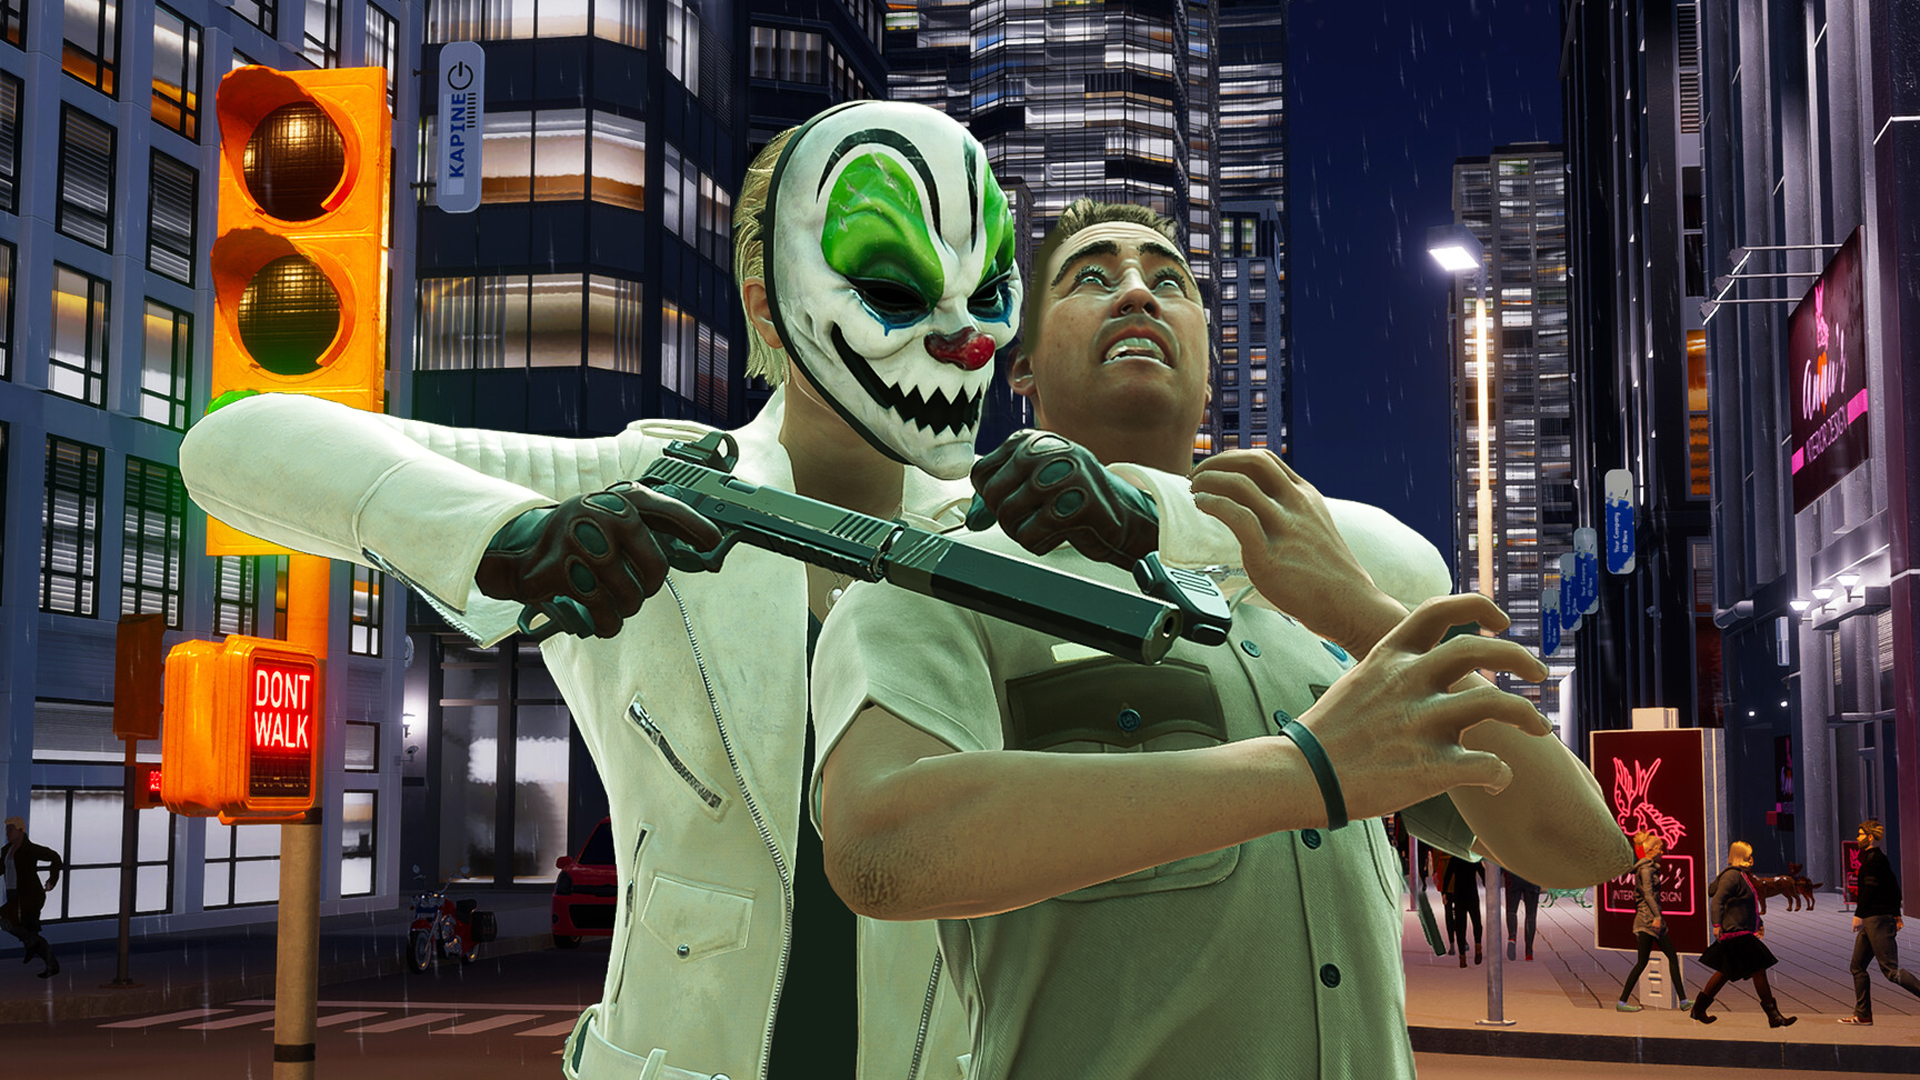 Despite everything, Payday 3 and Cities Skylines 2 sell big on Steam